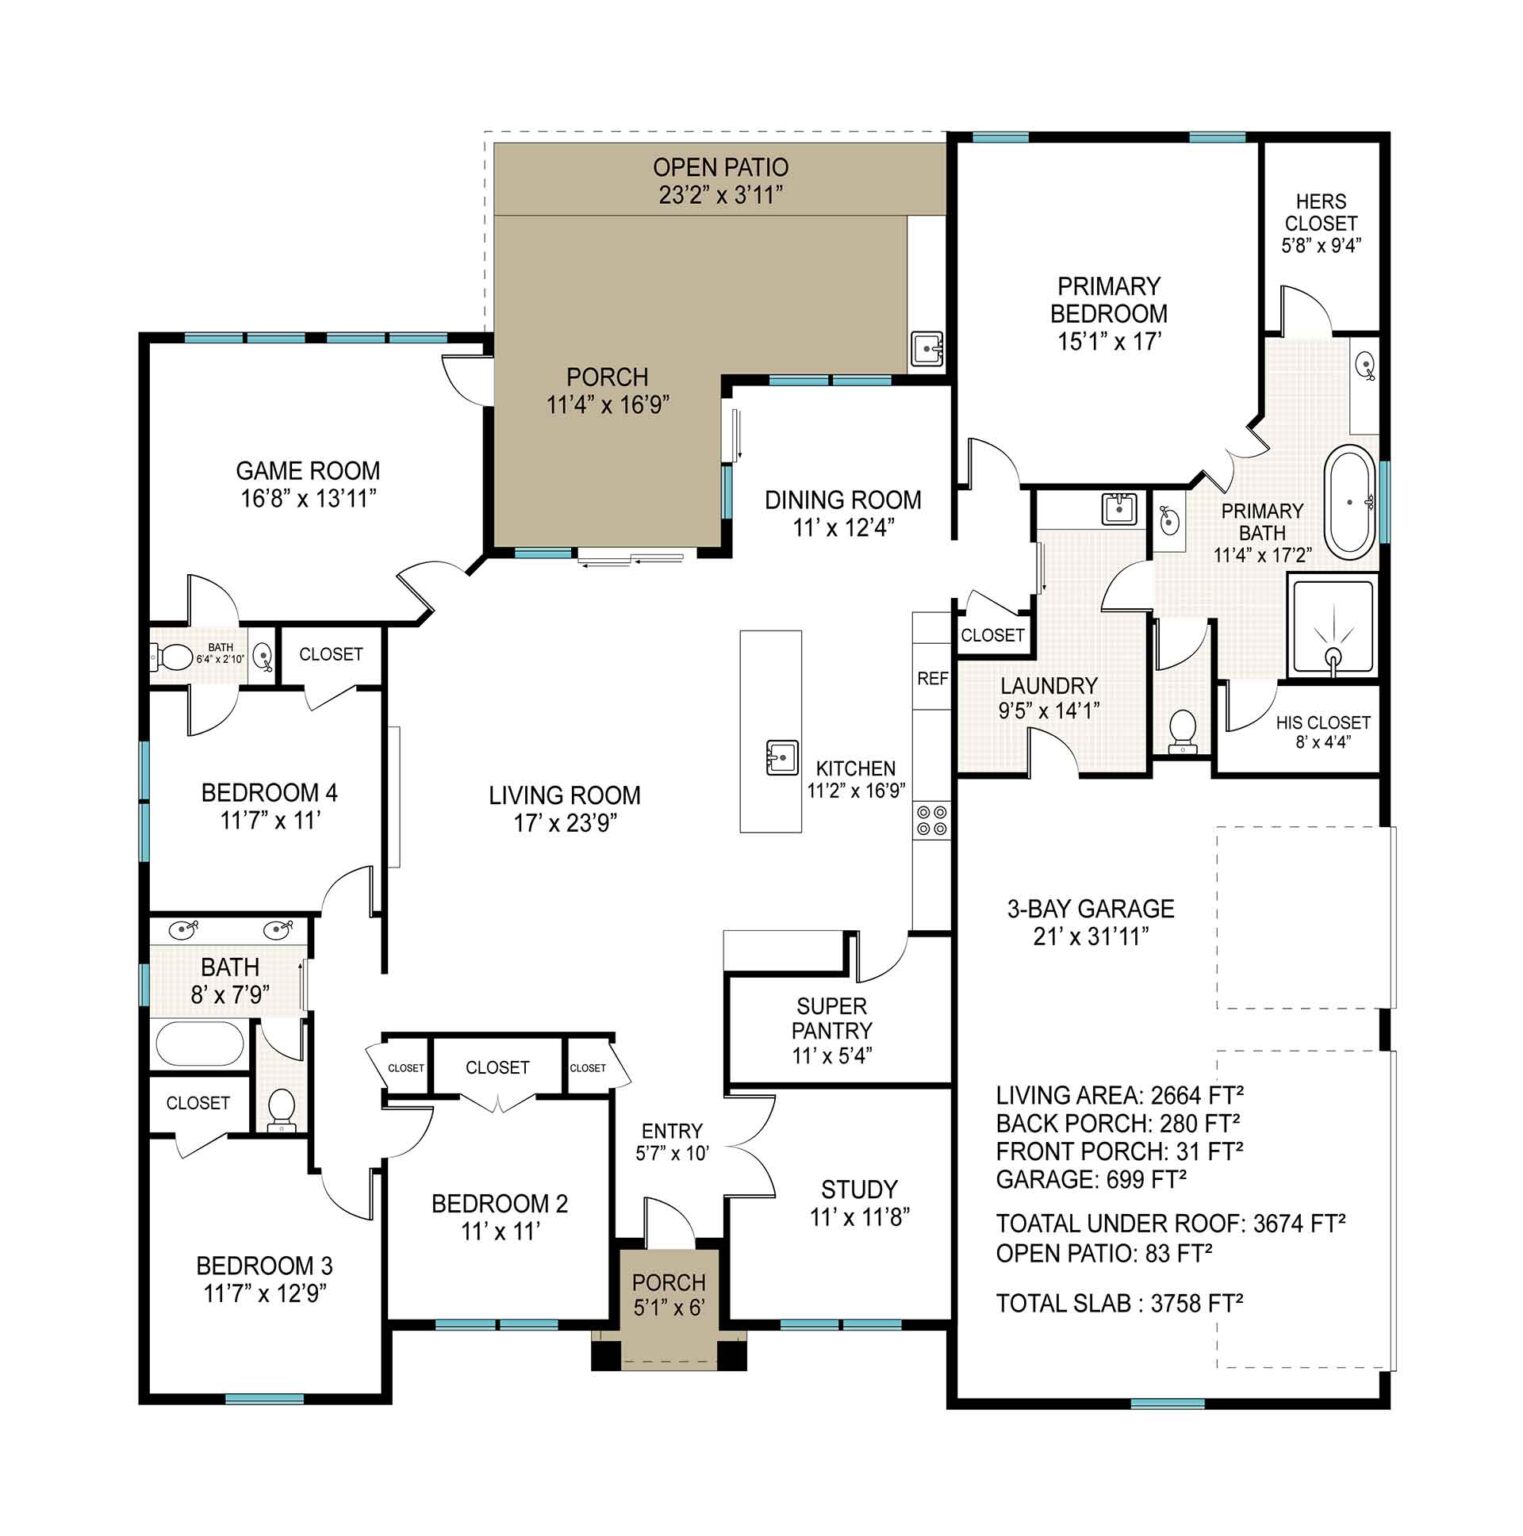 "Modern 4-bedroom home with 3 bathrooms, featuring 2664 sqft of heated and cooled living space within a total footprint of 3640 sqft. Presented by Pyramid Homes."